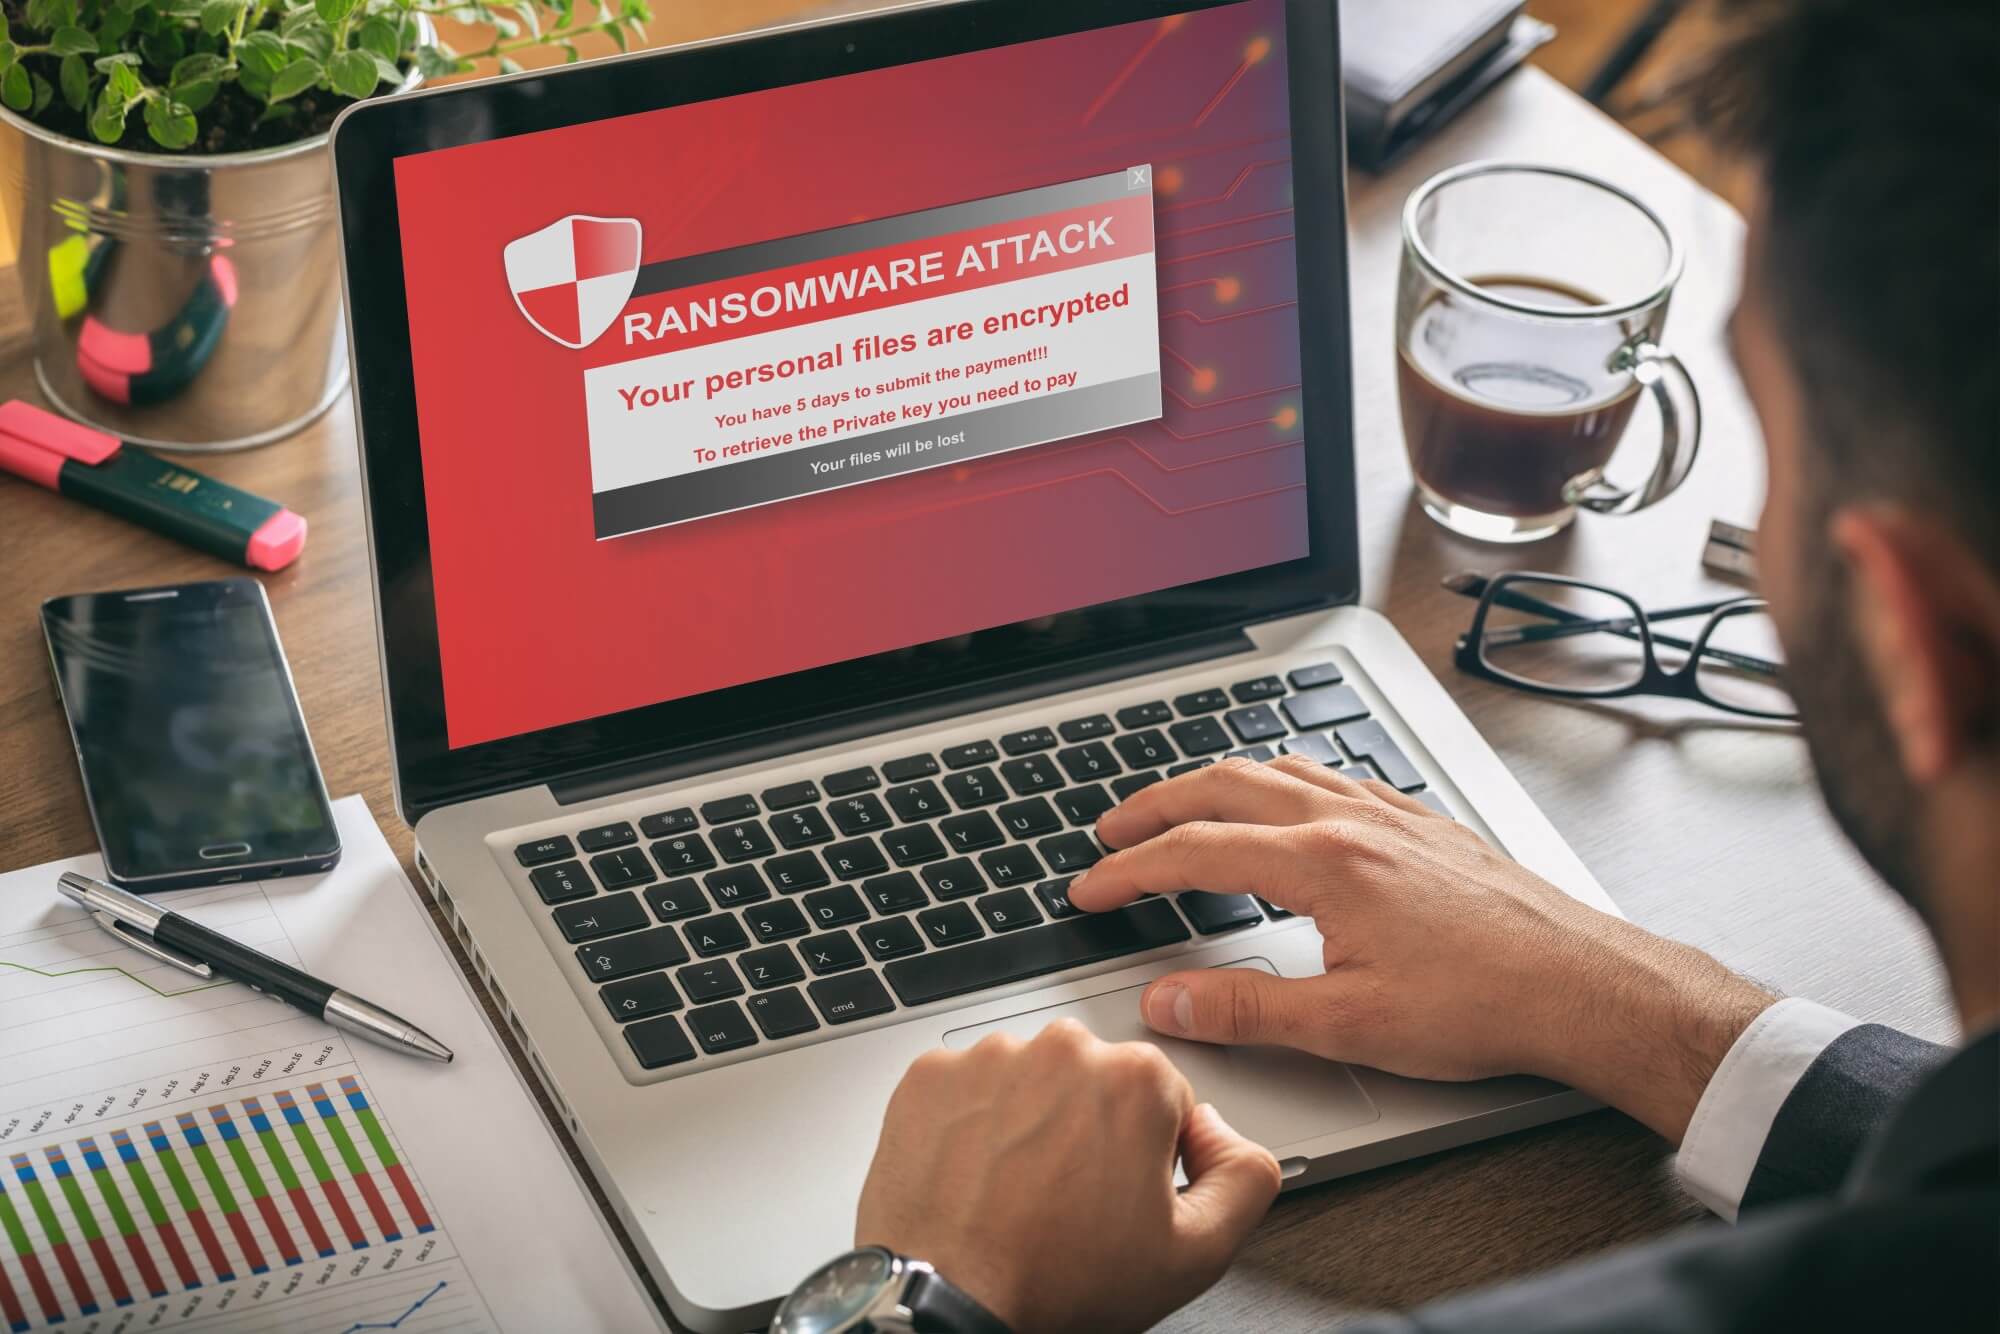 The Ultimate Guide on How to Prevent Ransomware